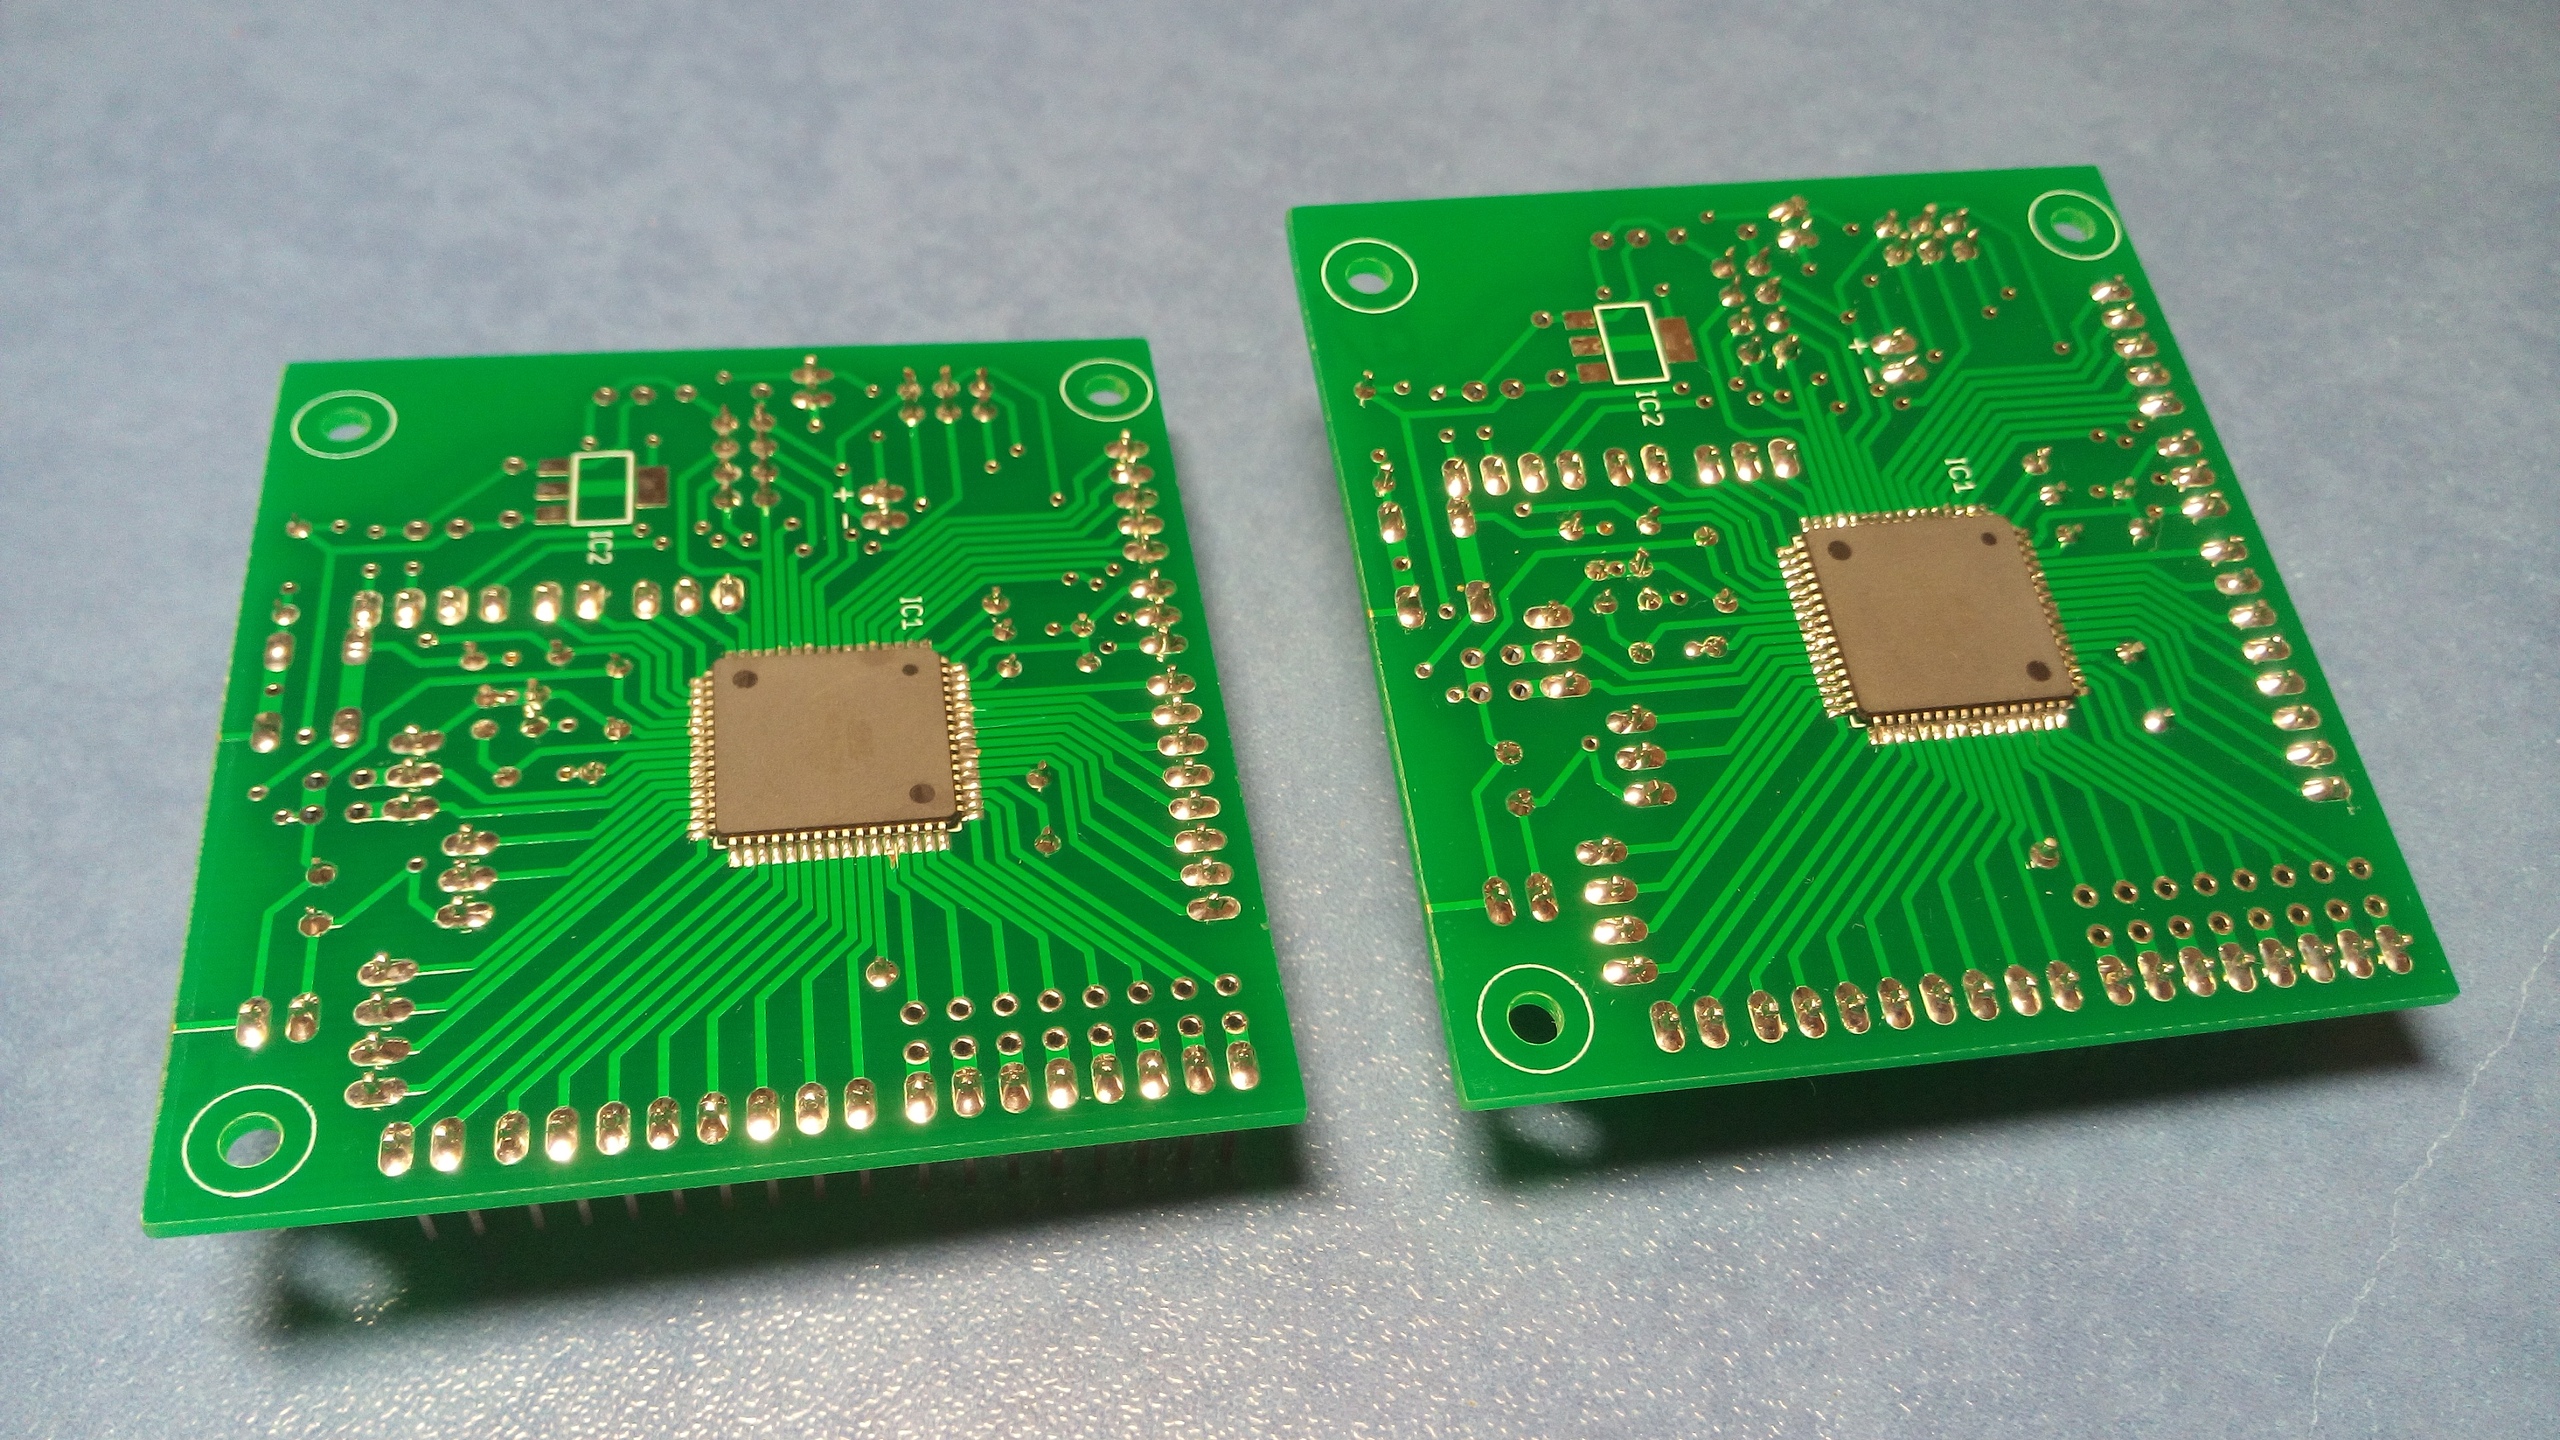 The back side of the boards after soldering the components